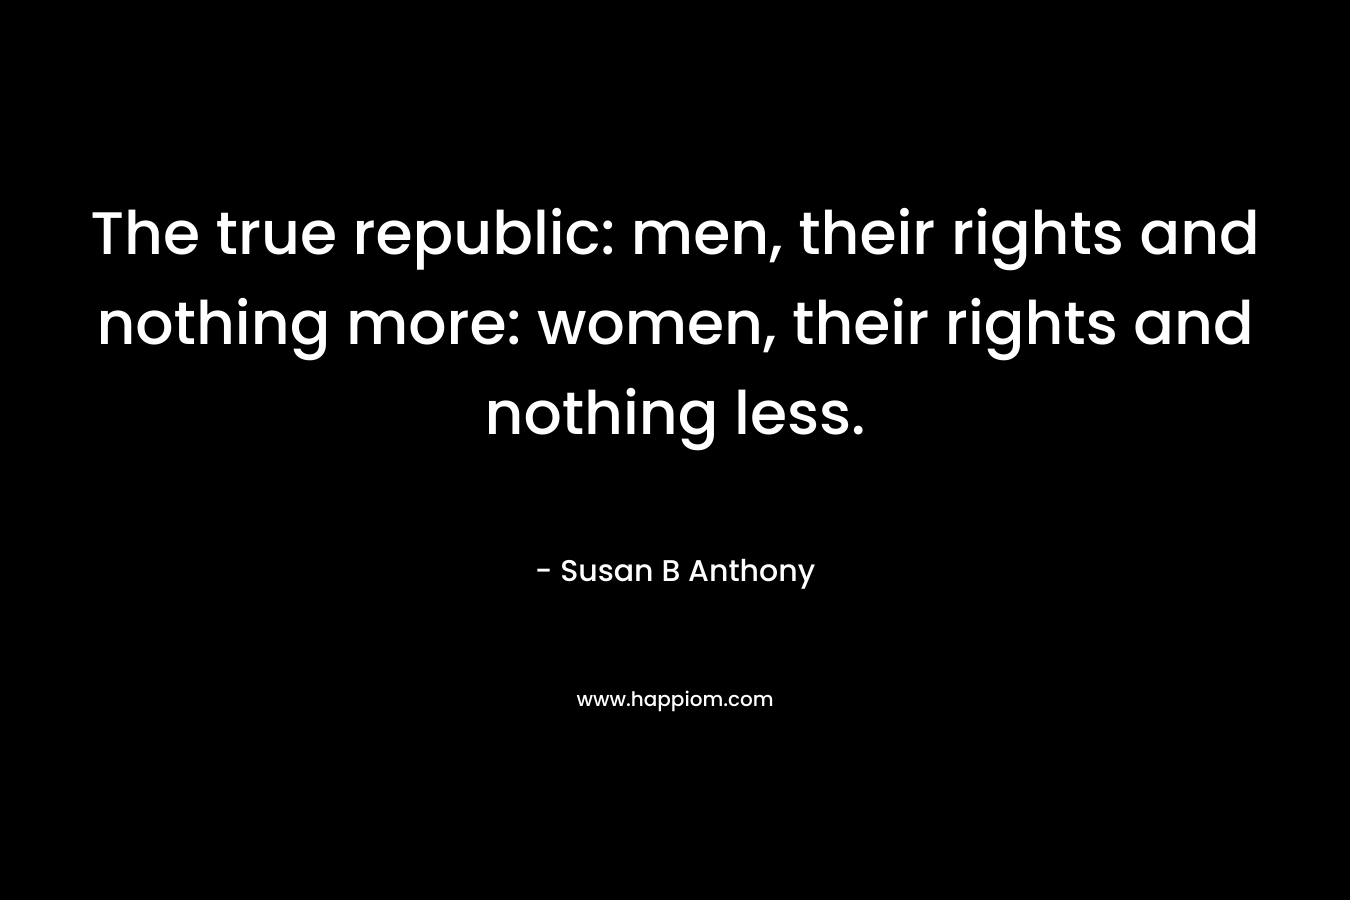 The true republic: men, their rights and nothing more: women, their rights and nothing less. – Susan B Anthony